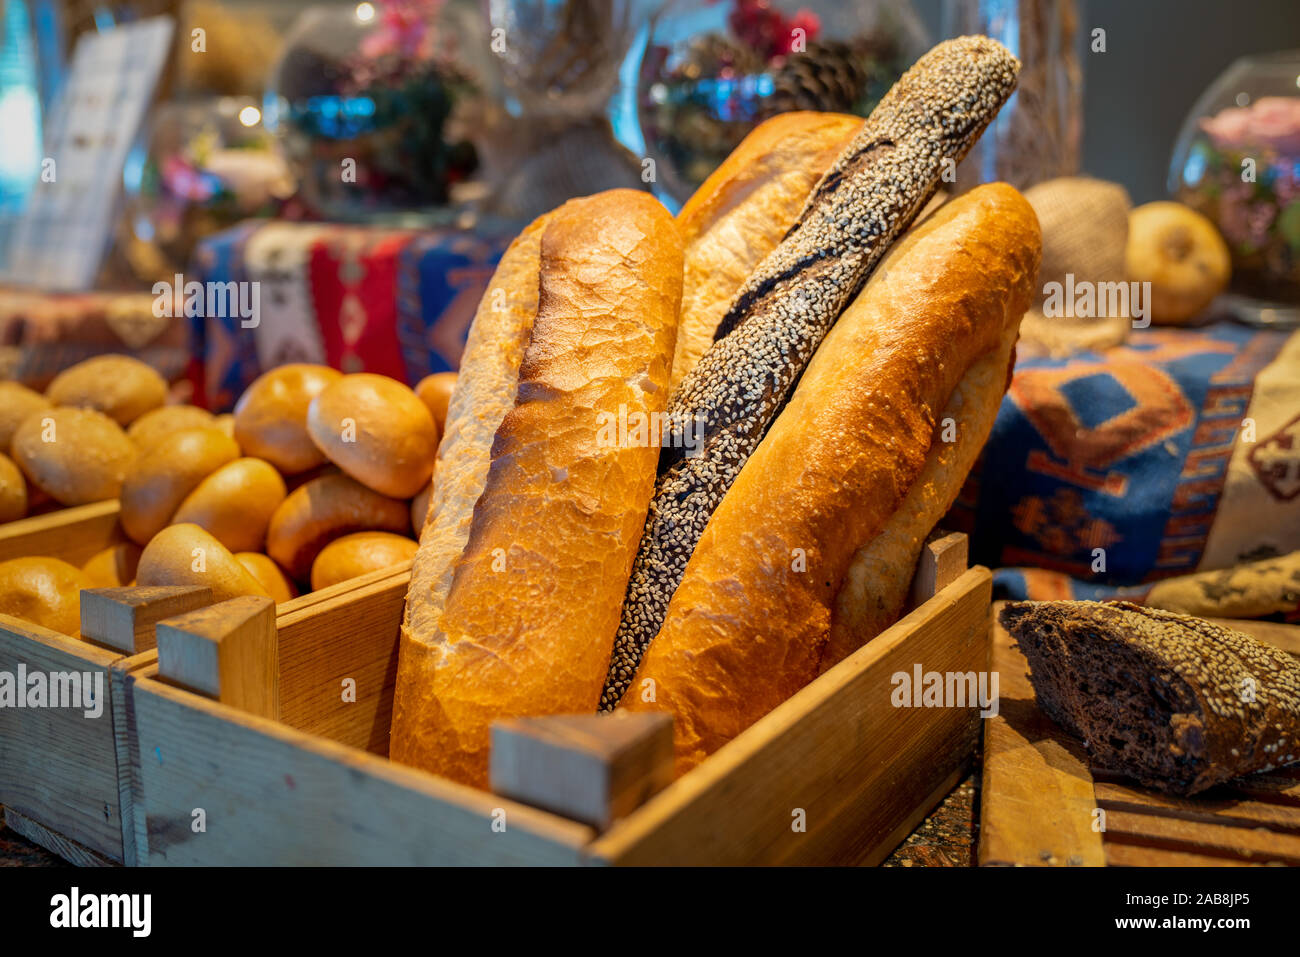 A delicious bread and bakery buffet in a elegance restaurant or hotel. Stock Photo